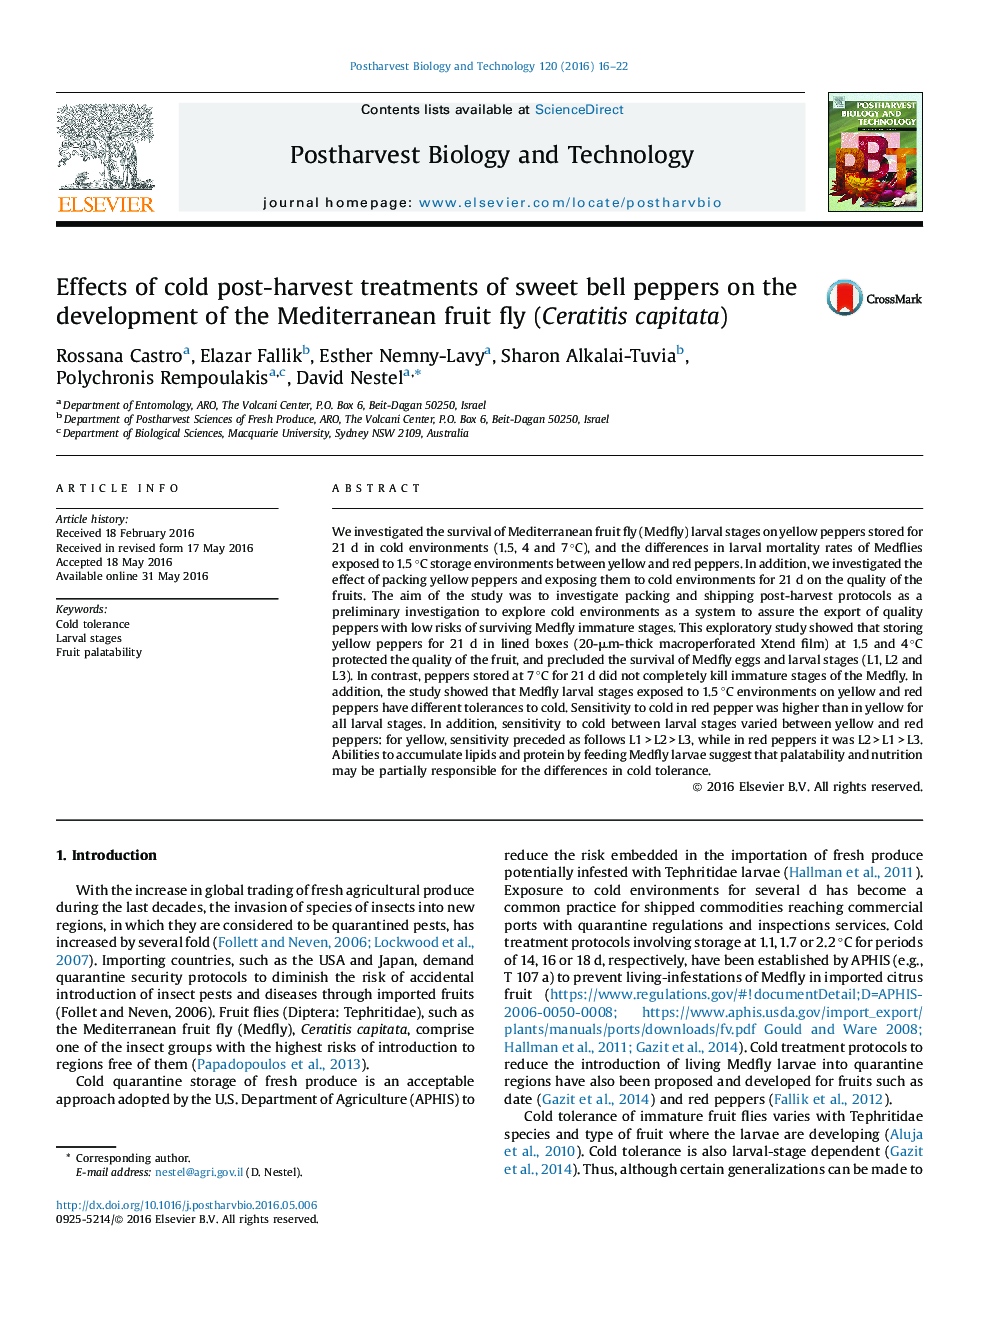 Effects of cold post-harvest treatments of sweet bell peppers on the development of the Mediterranean fruit fly (Ceratitis capitata)